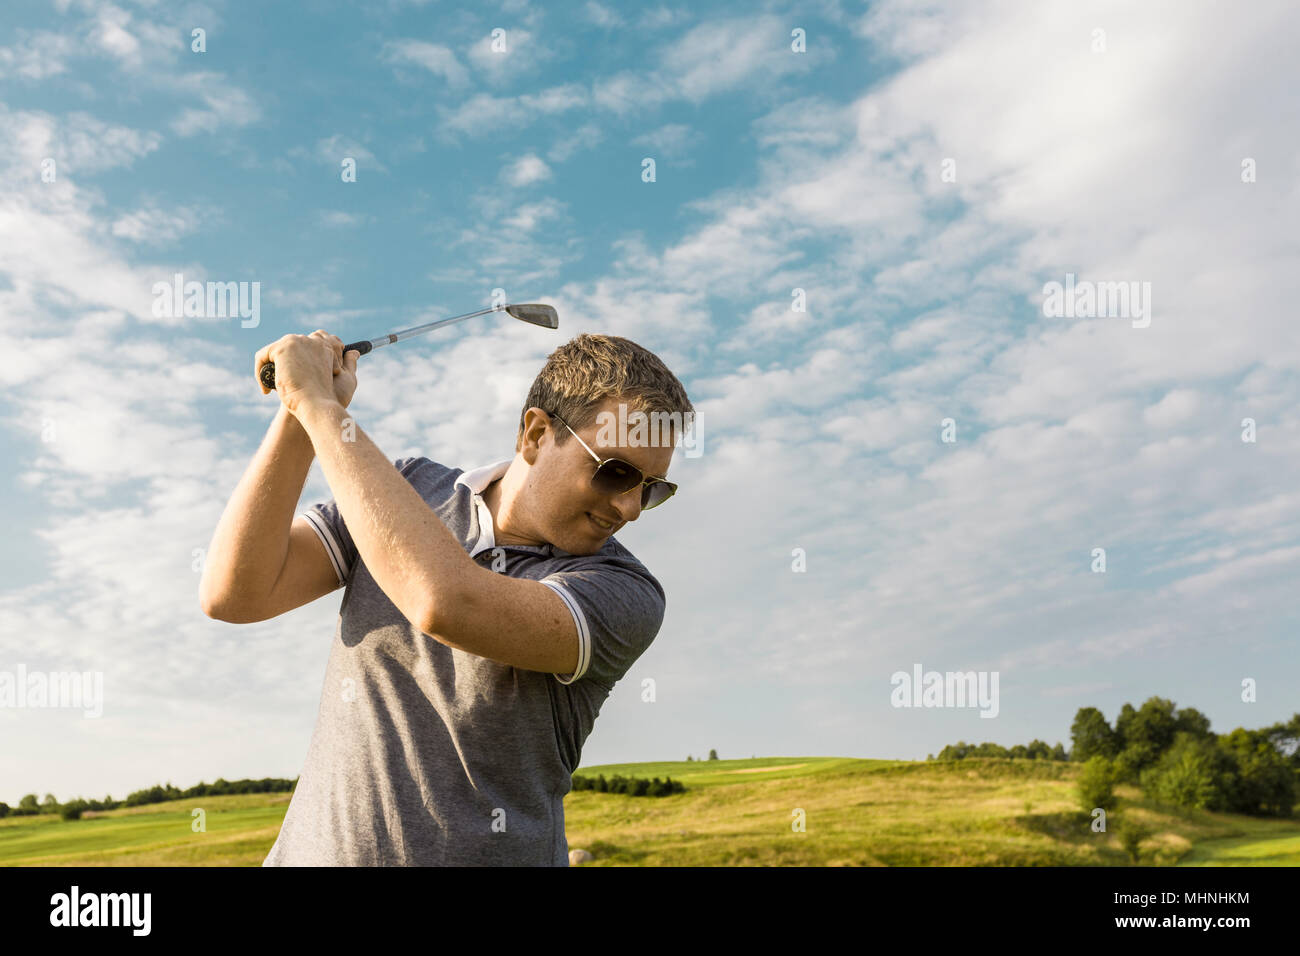 Close up of young man swinging a golf club Stock Photo